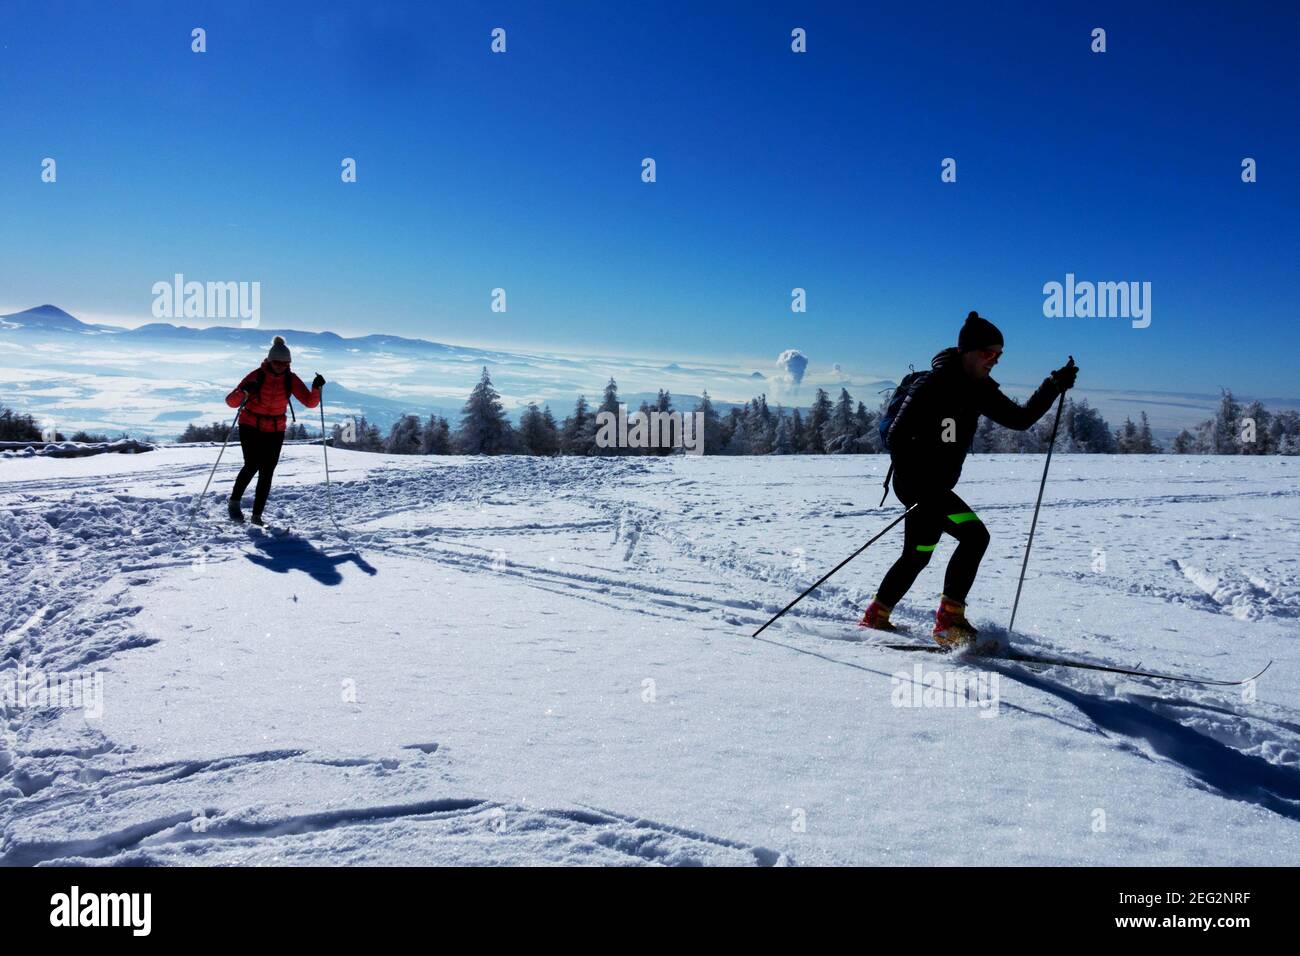 Silhouettes of a pair of skiers enjoying a nice sunny day in a snowy landscape Stock Photo